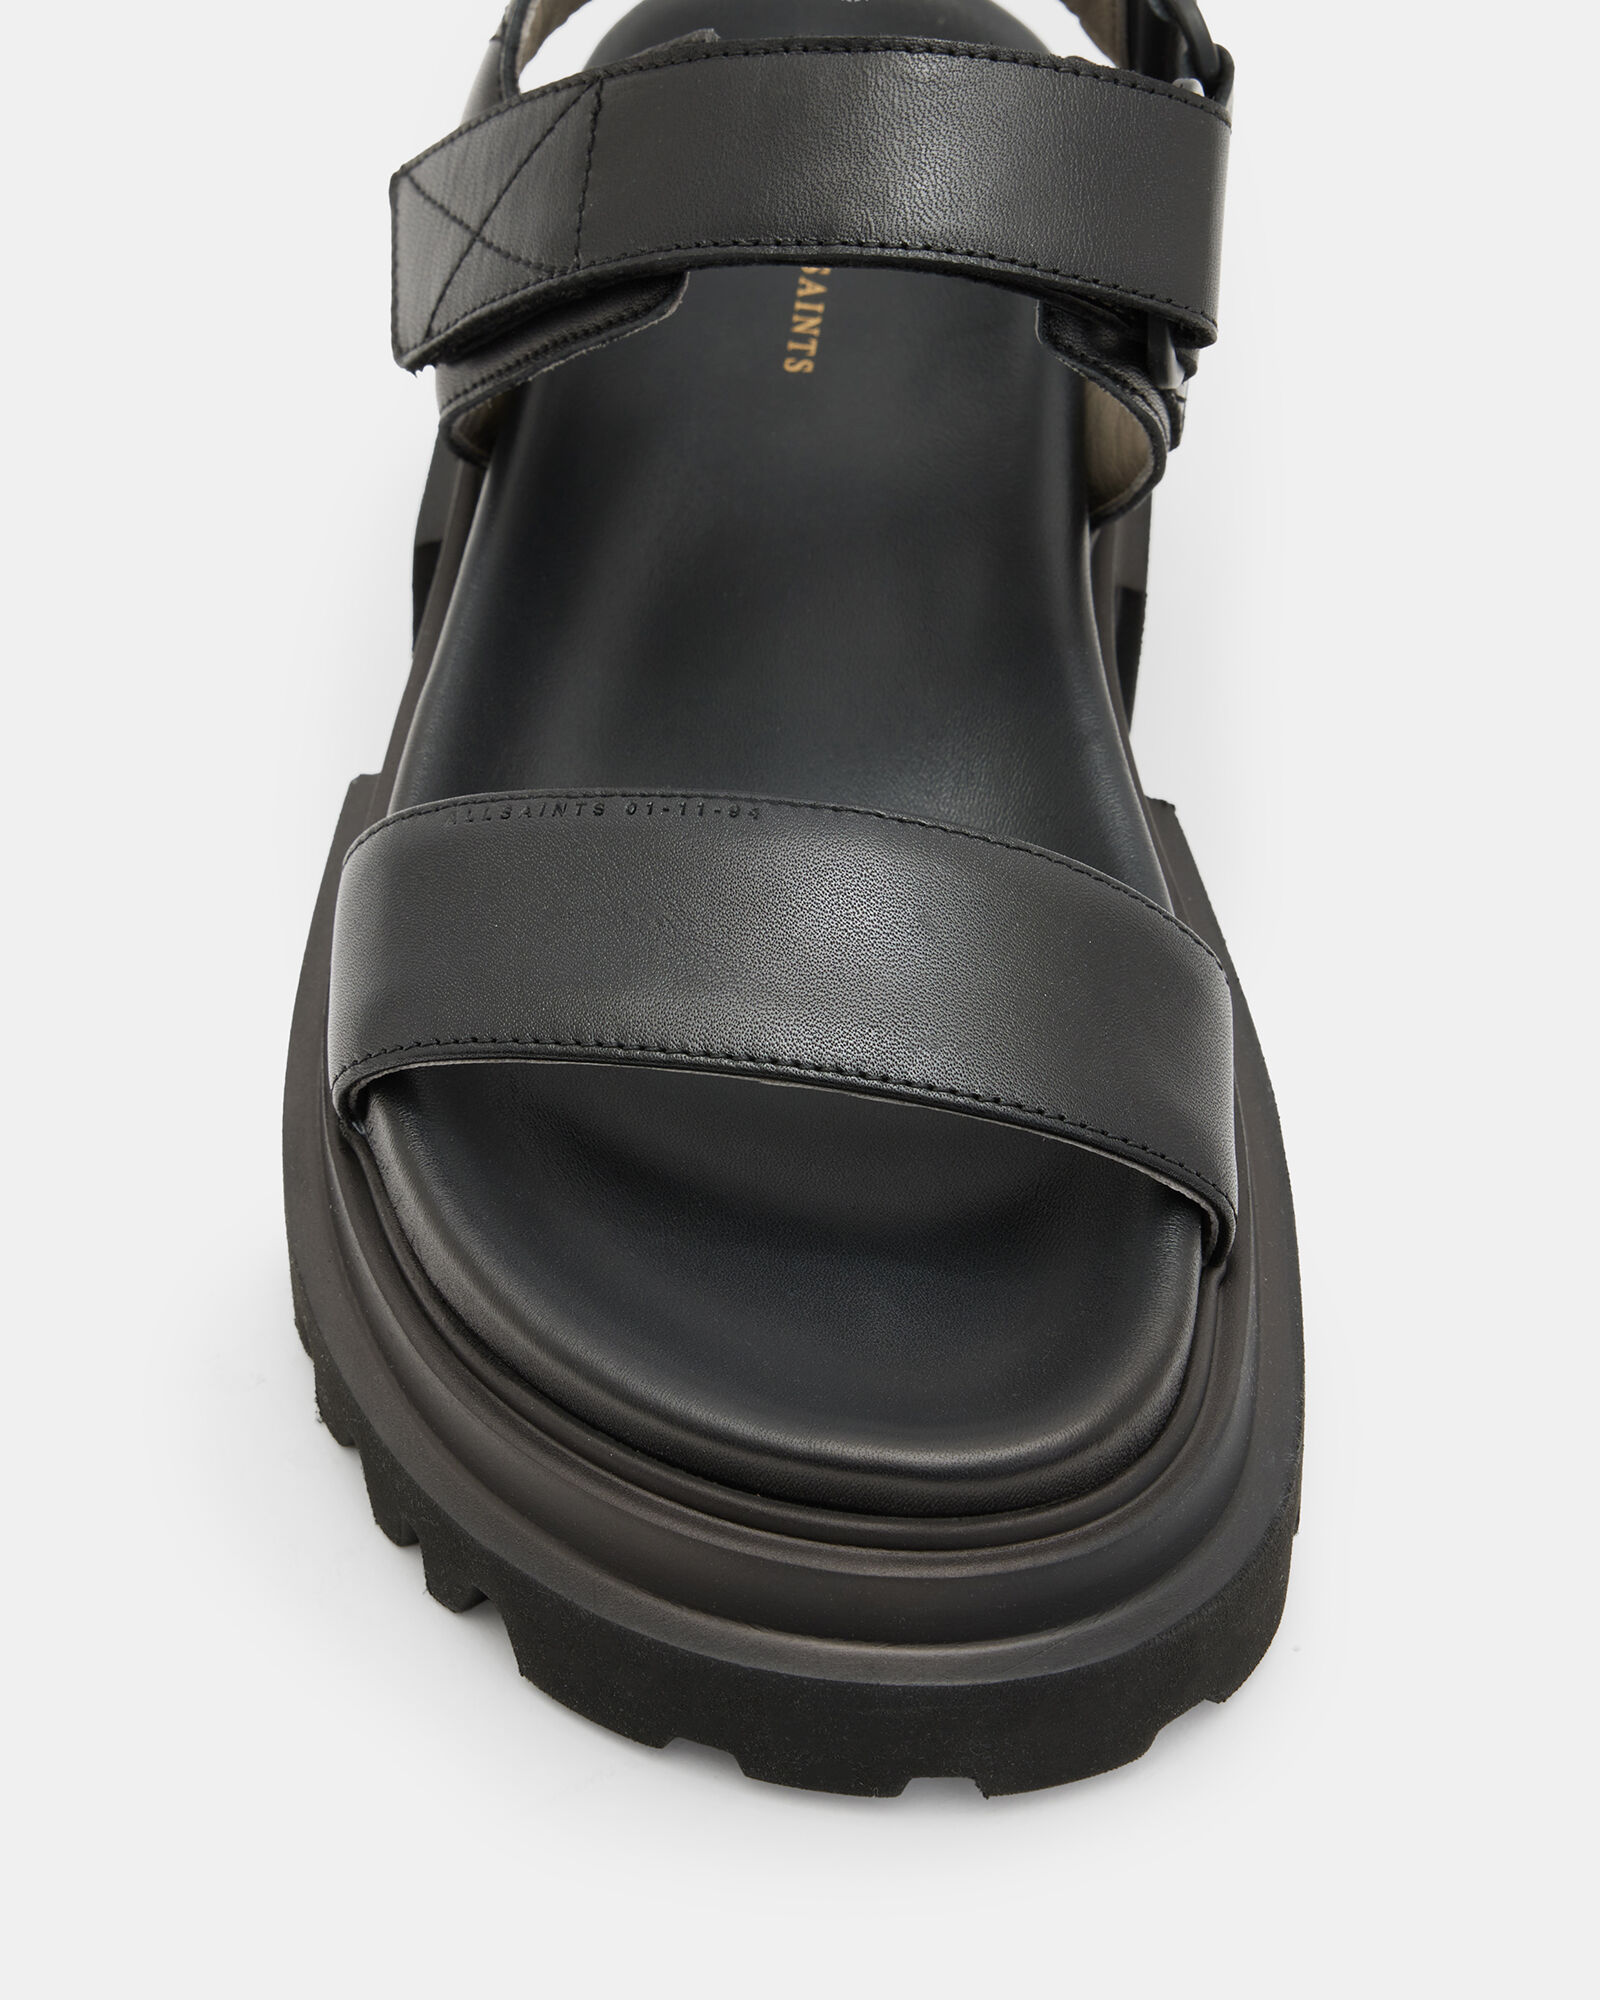 Clarks April Cove Sandal - Free Shipping | DSW